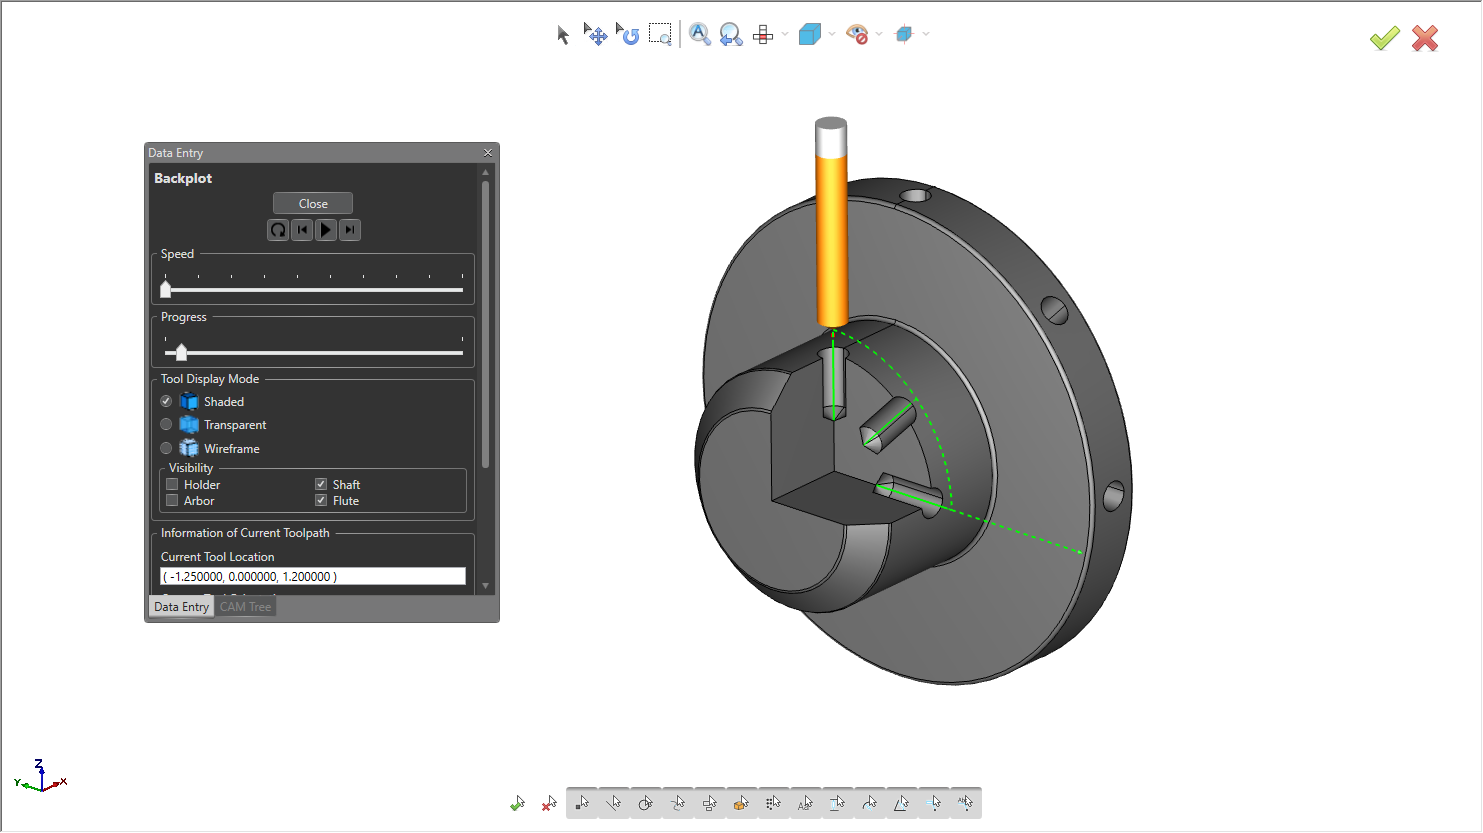 4 Axis Cross Drilling Example- Finds hole size and depth based on model selection